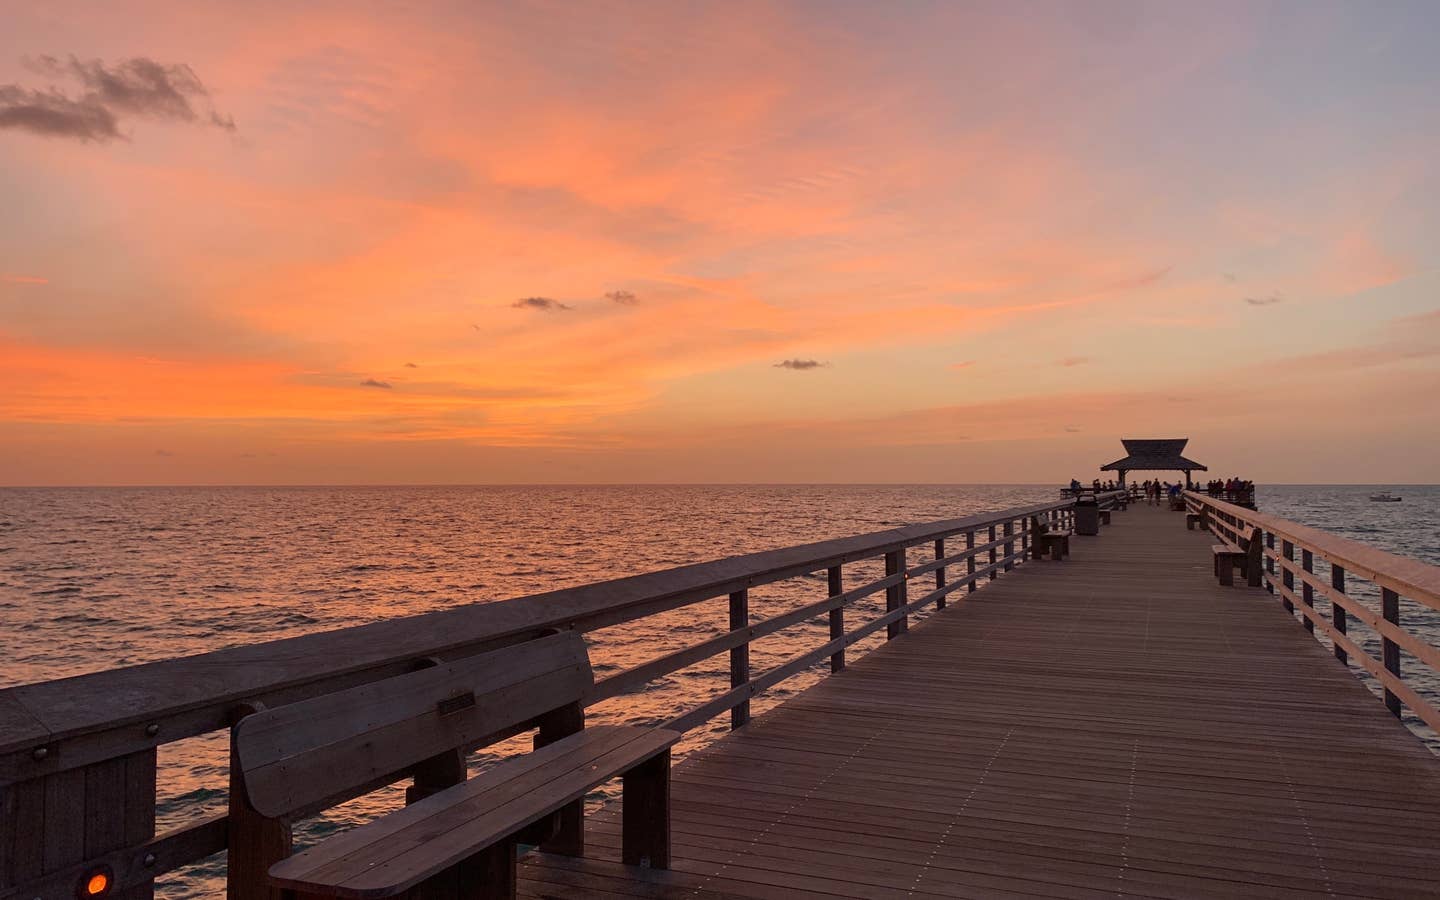 A beautiful view of the colorful sunset from the pier on Marco Island, Florida.